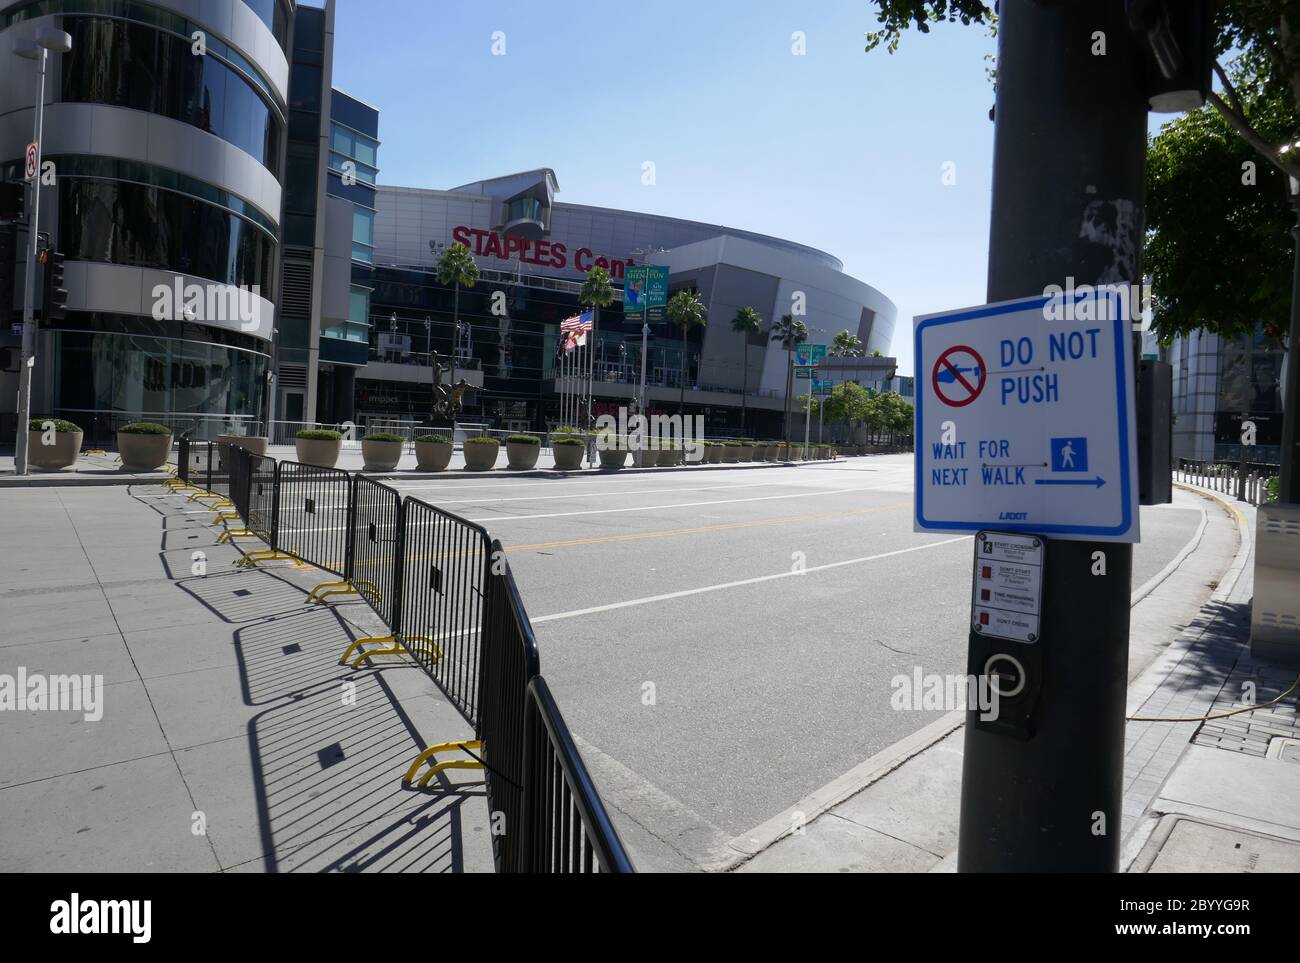 Los Angeles, California USA 10th June 2020 A general view of atmosphere of Staples Center Closed and street blocked off at LA Live in Los Angeles, California, USA. Photo by Barry King/Alamy Live News Stock Photo